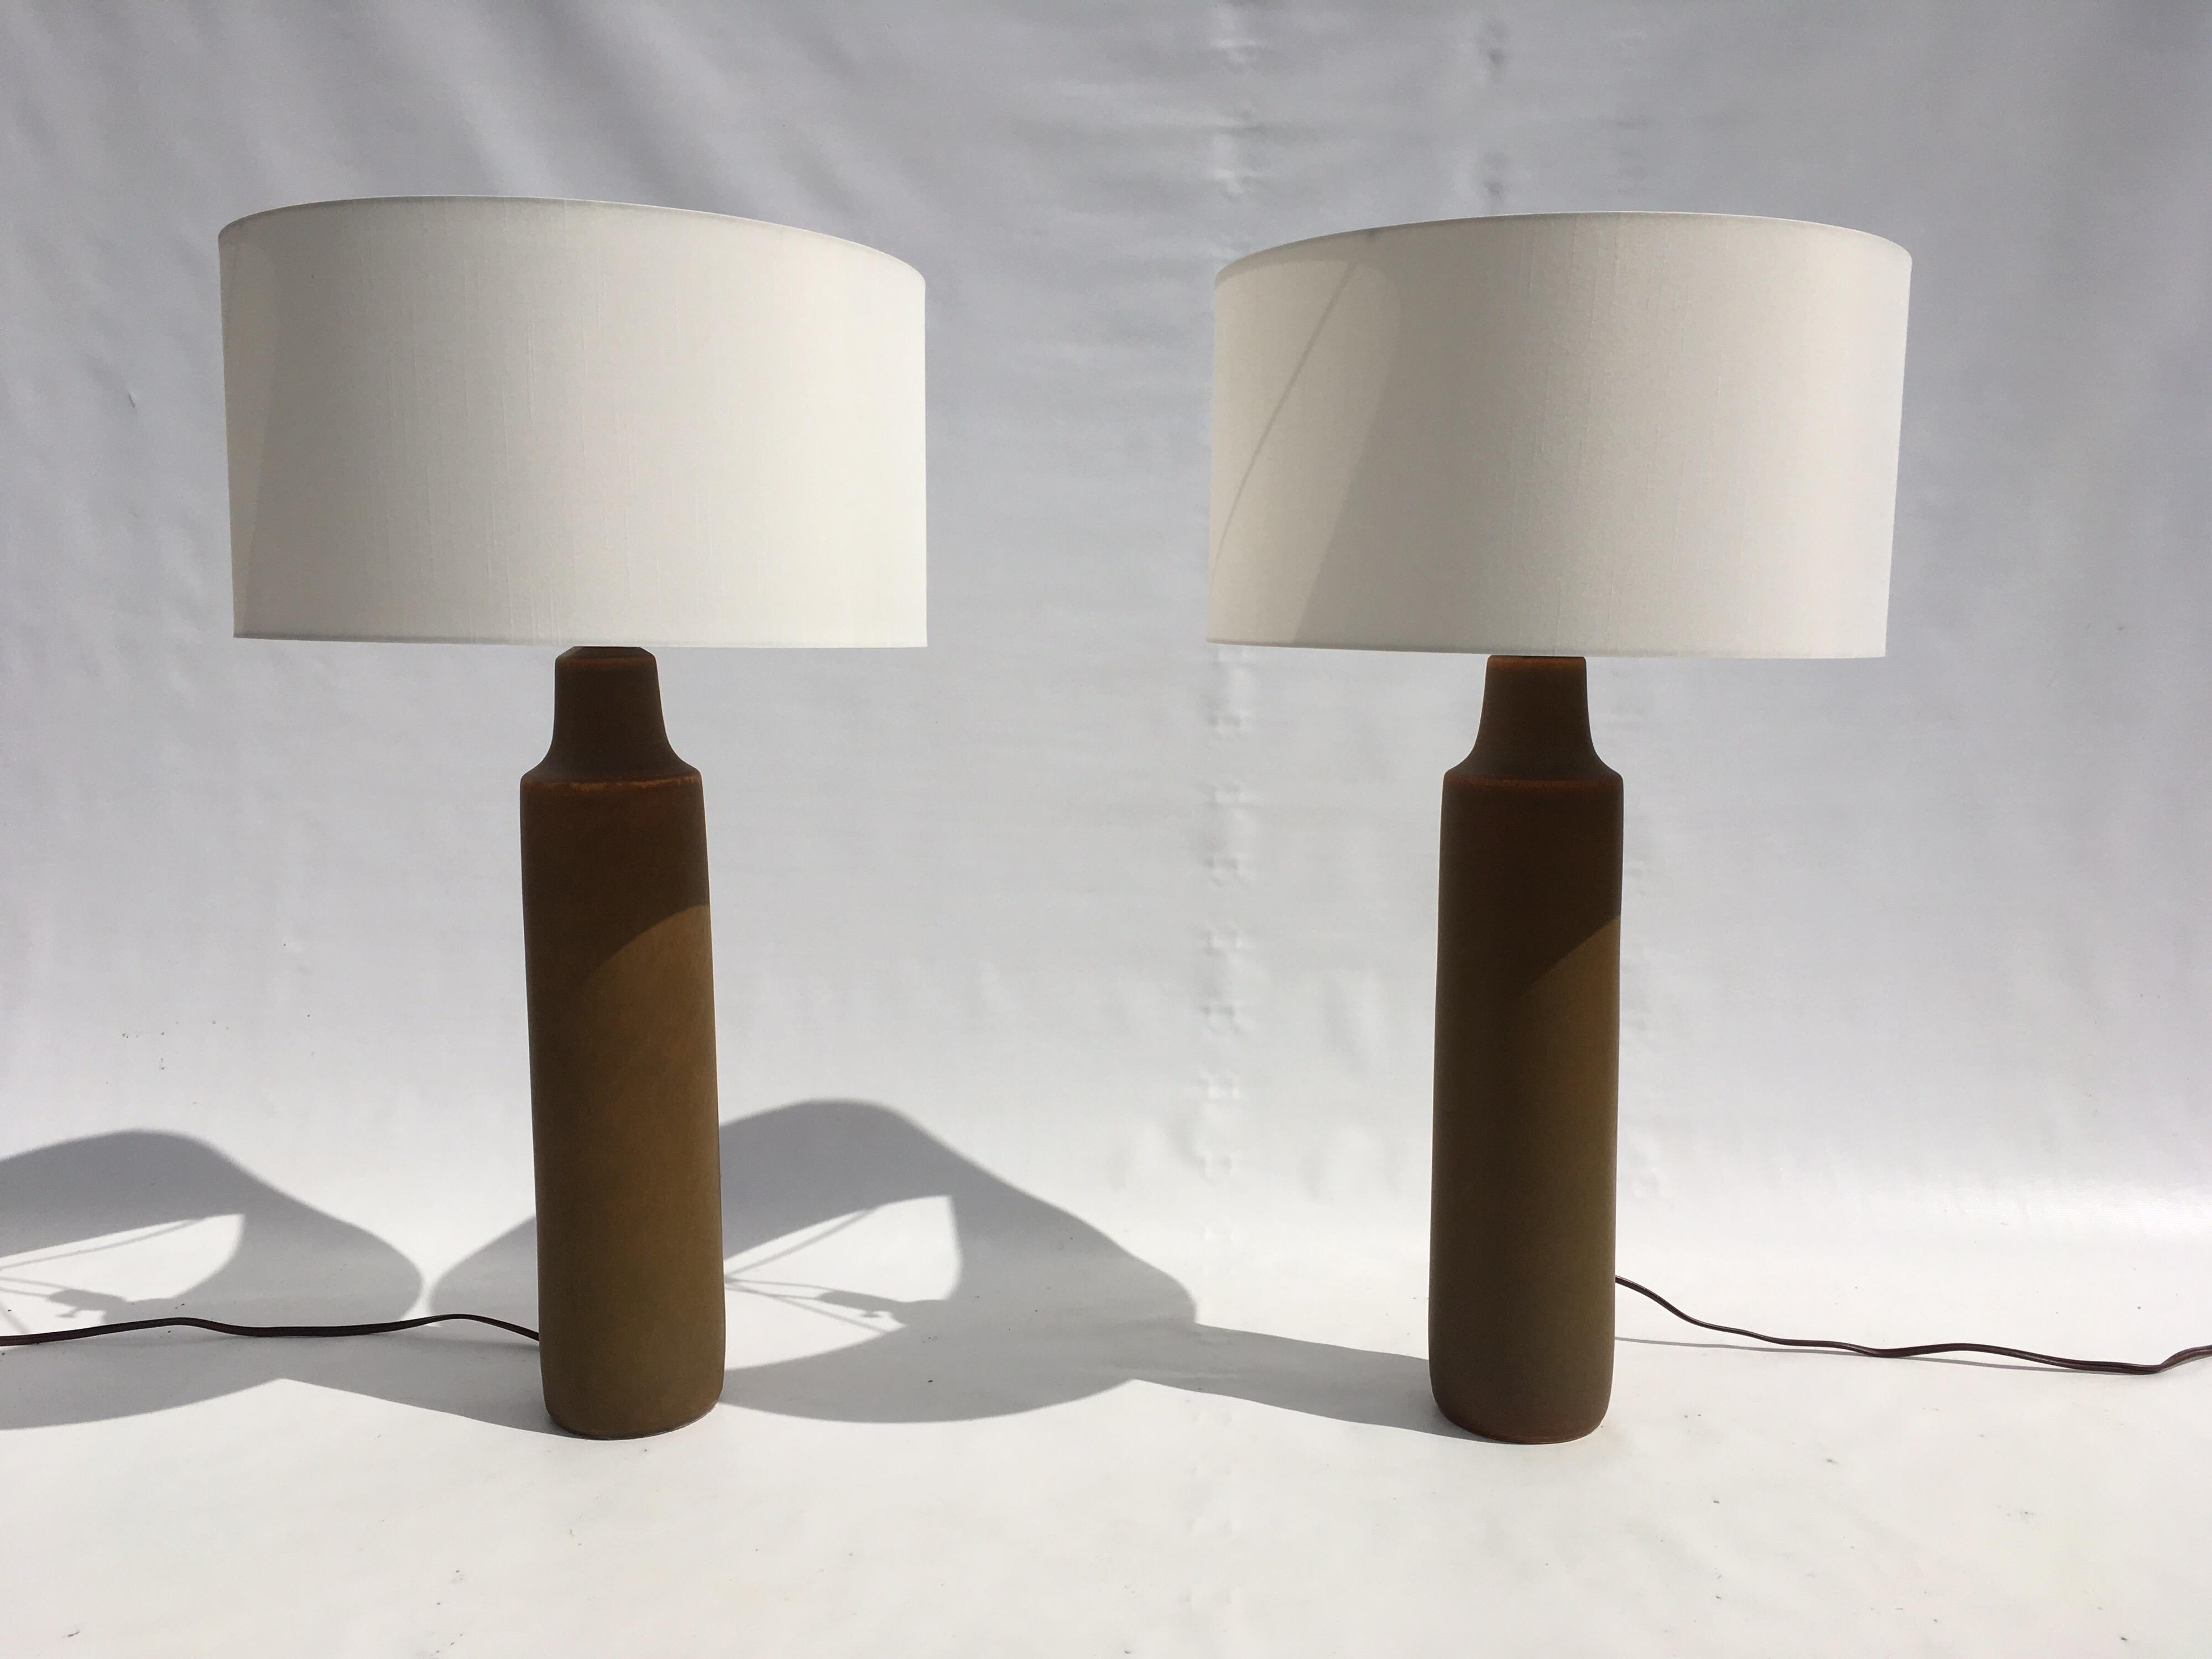 Pair of Large Beautiful Ceramic Tables Lamps with Shades, Midcentury, Usa, 1950s 4